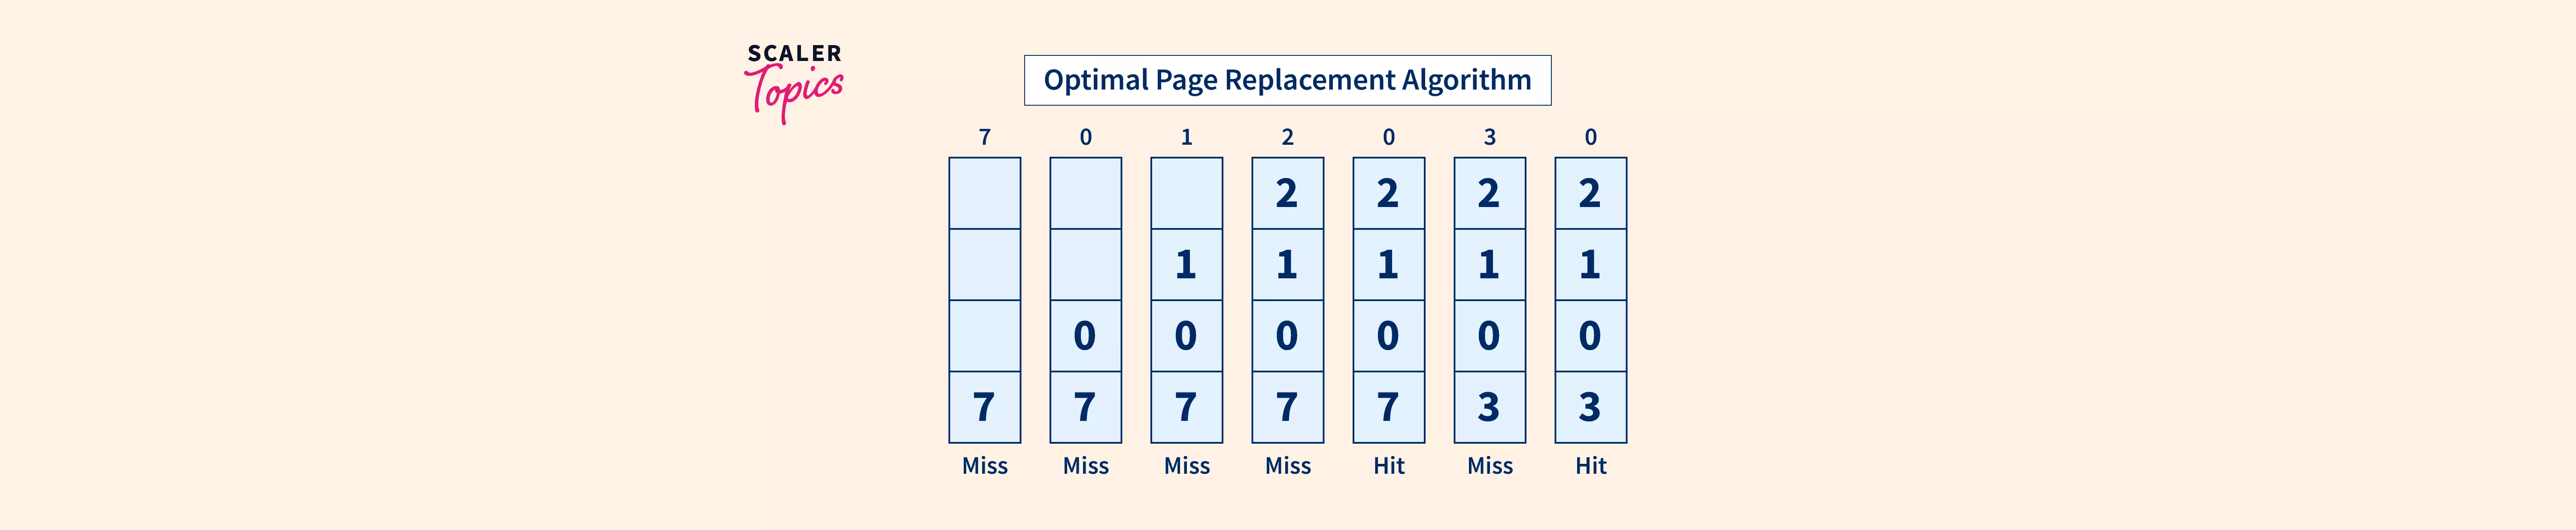 optimal-page-replacement-algorithm-scaler-topics